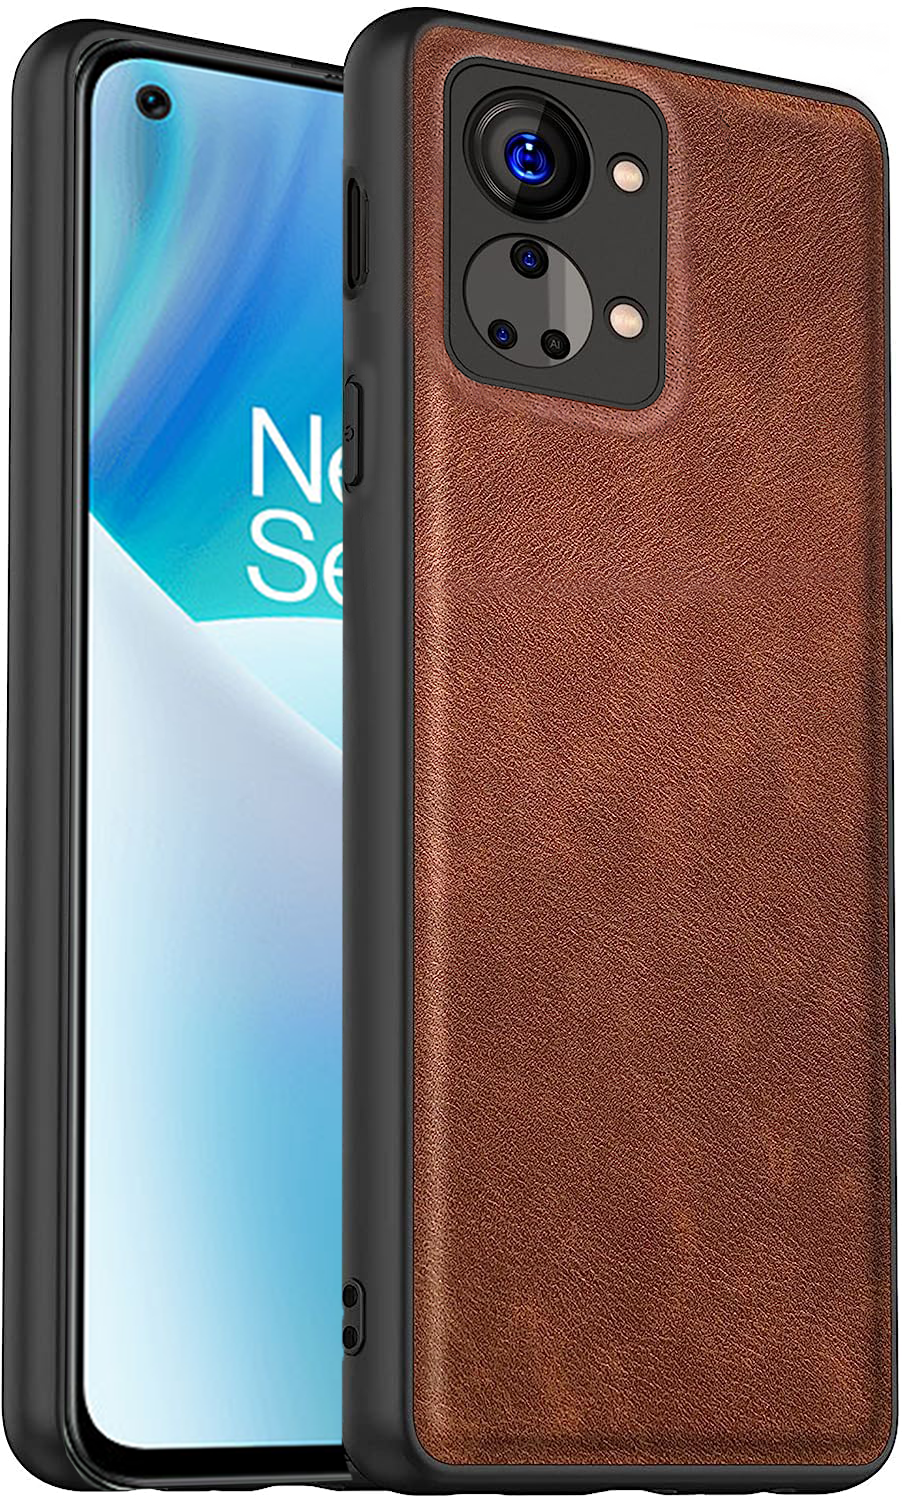 Excelsior Premium Vintage PU Leather Back Cover case For Oneplus Nord 2T